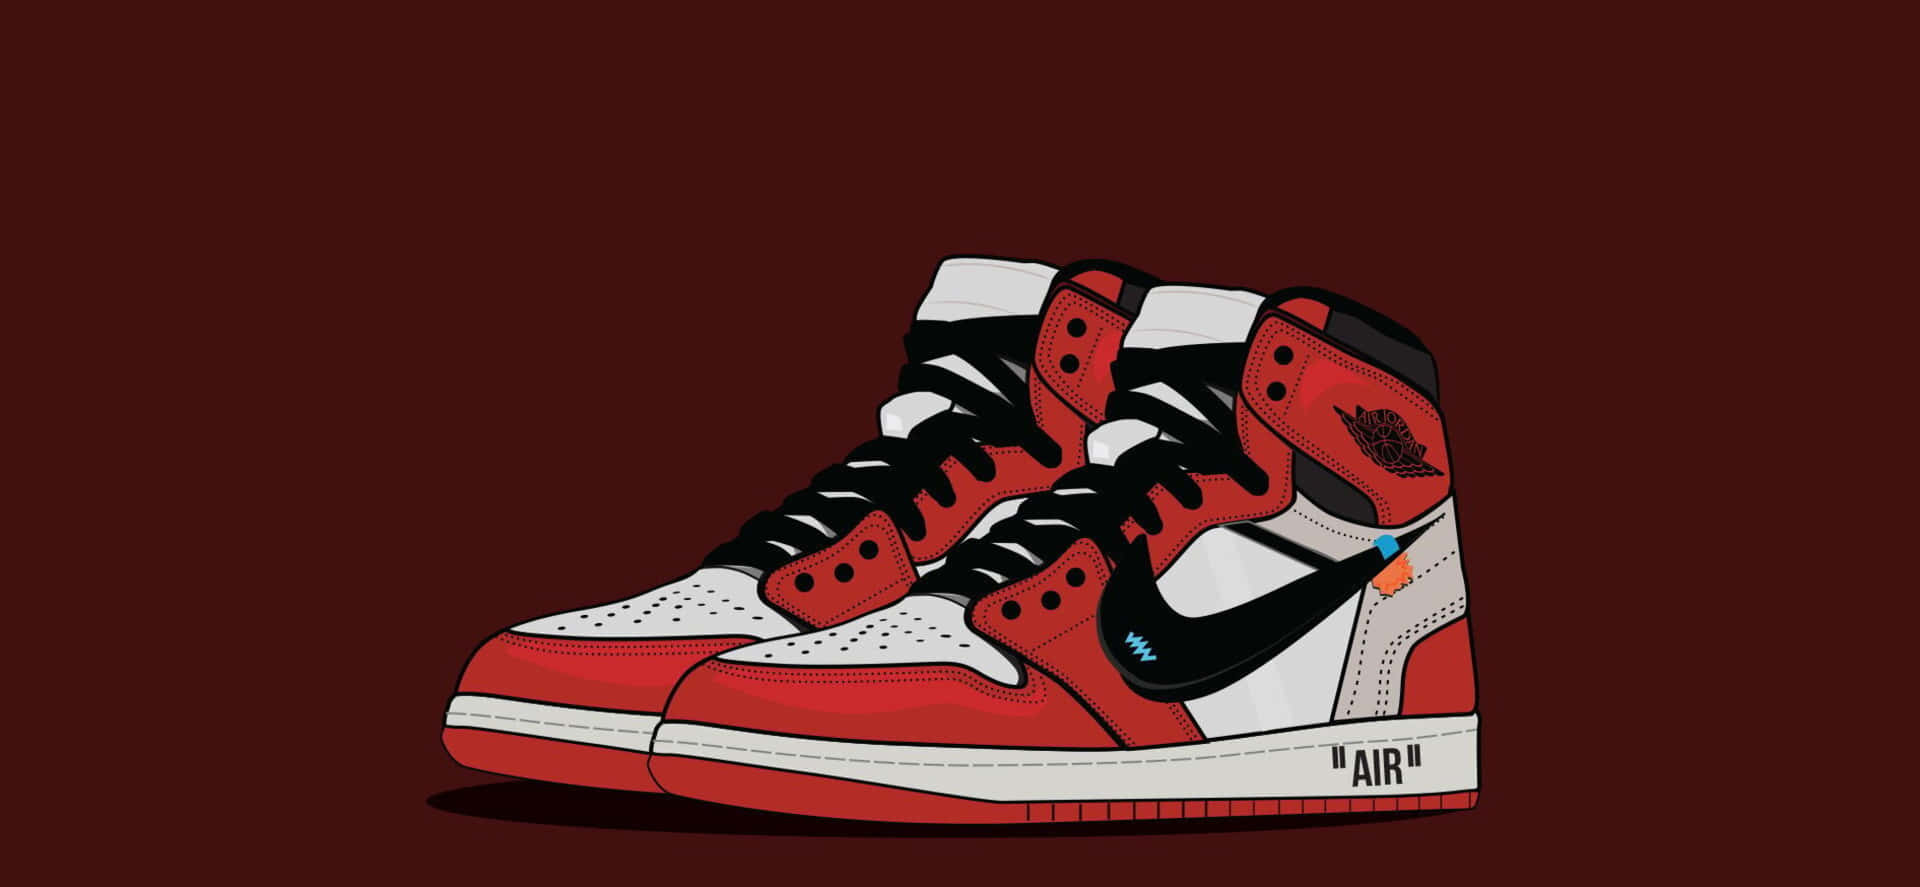 The iconic Nike Air Jordan shoes – a classic staple of street style. Wallpaper